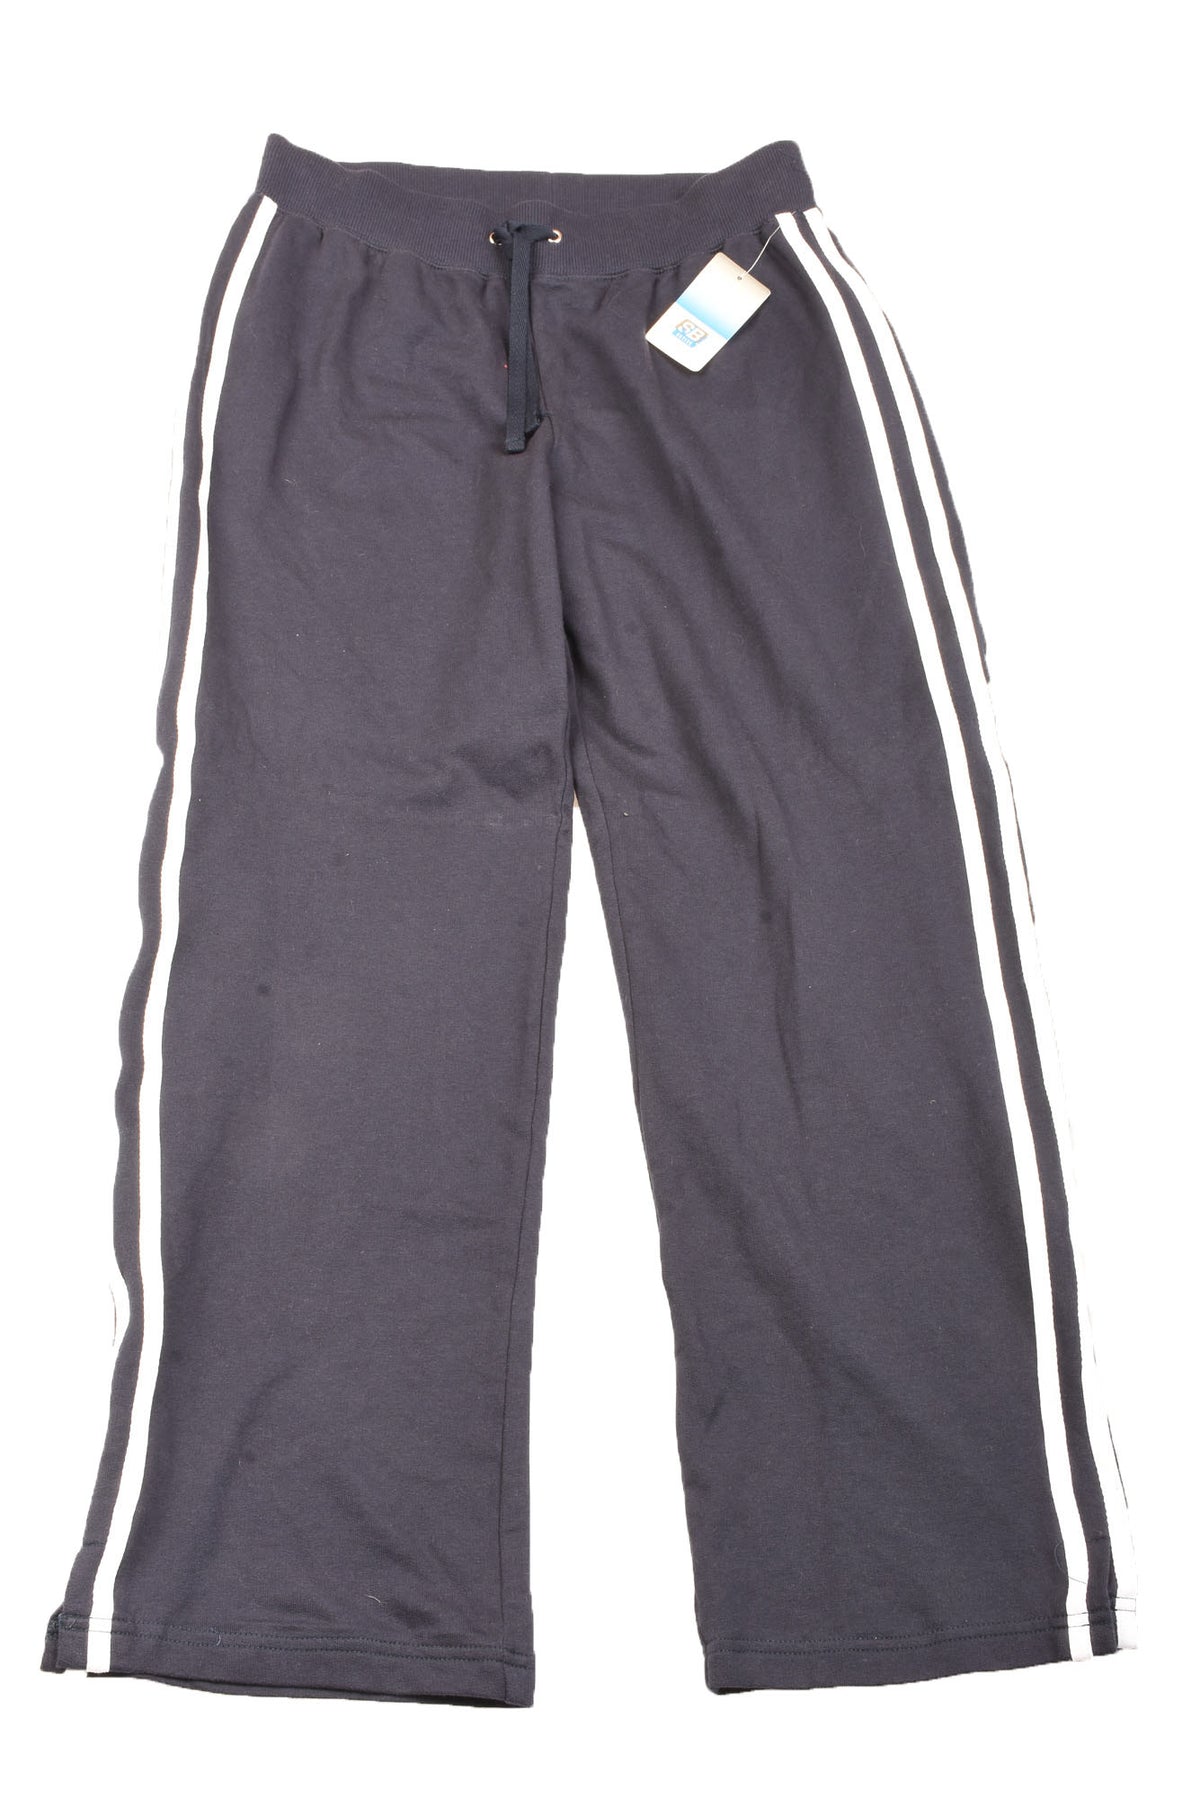 SB Active Size Small Women's Activewear Petite Pants - Your